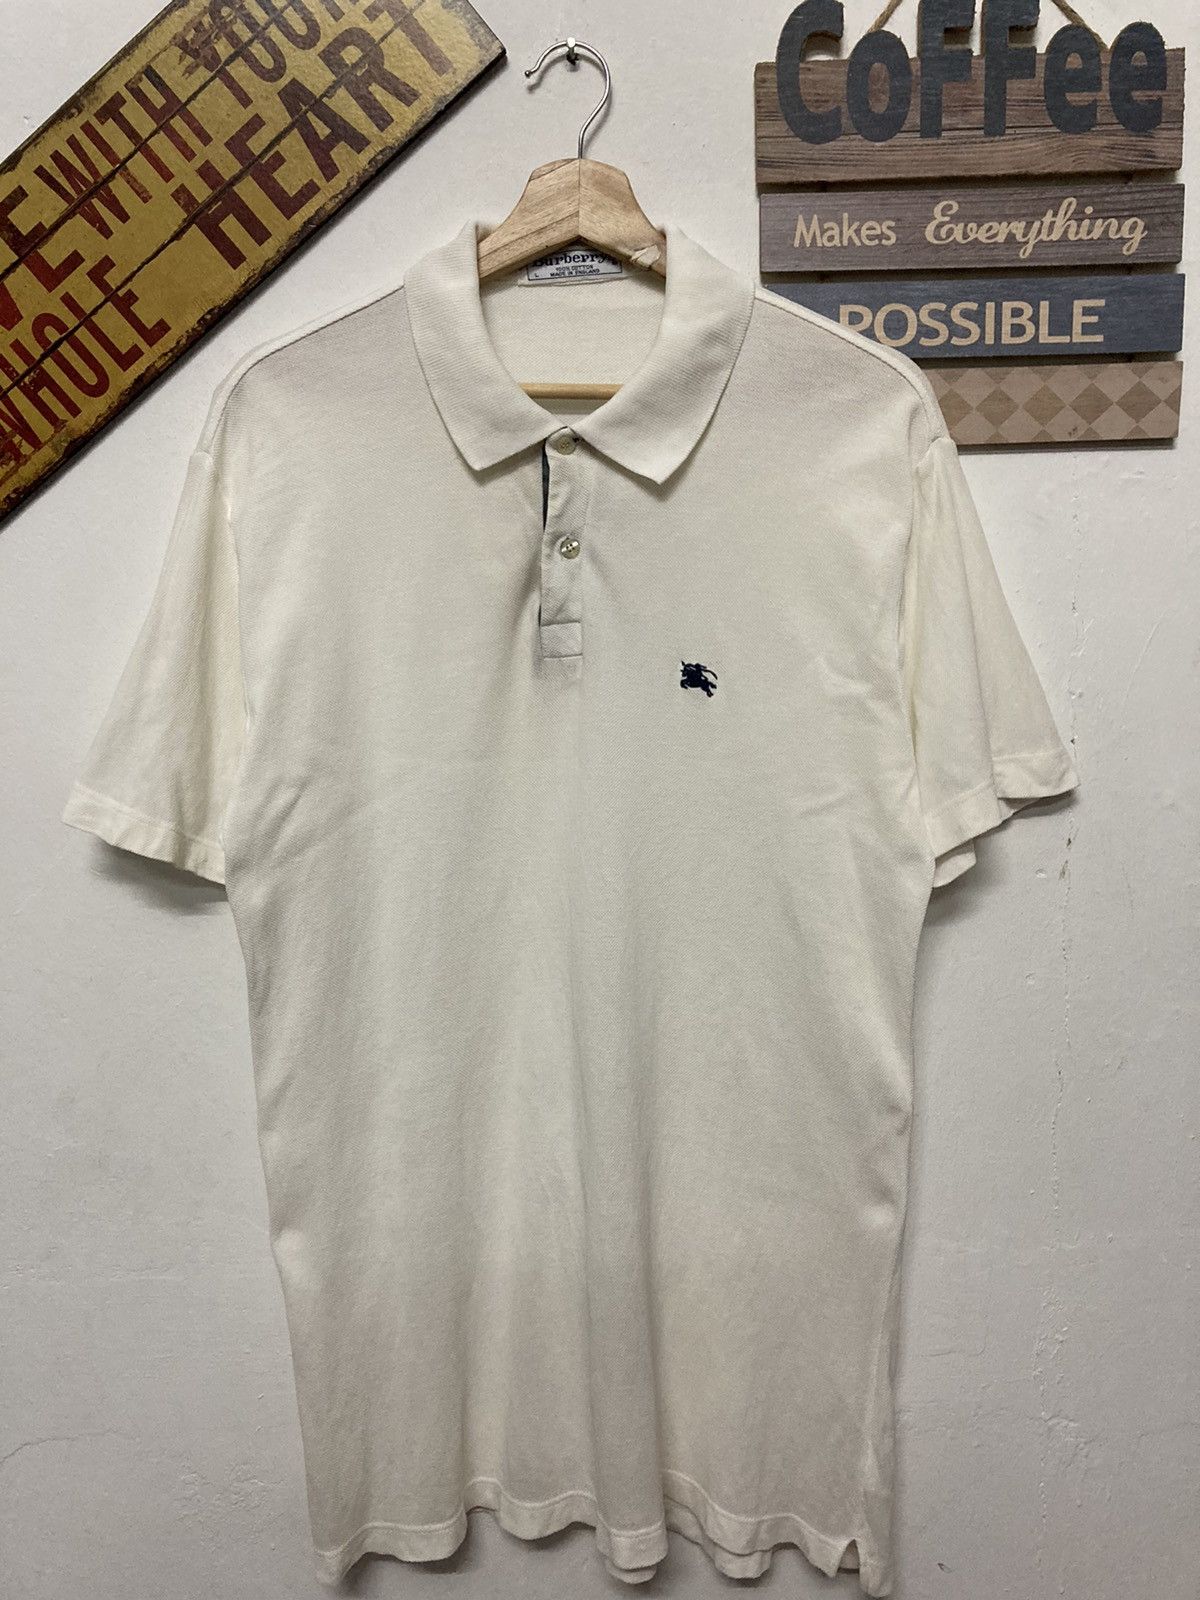 Vintage Burberrys Polo Shirt Made in England - 1